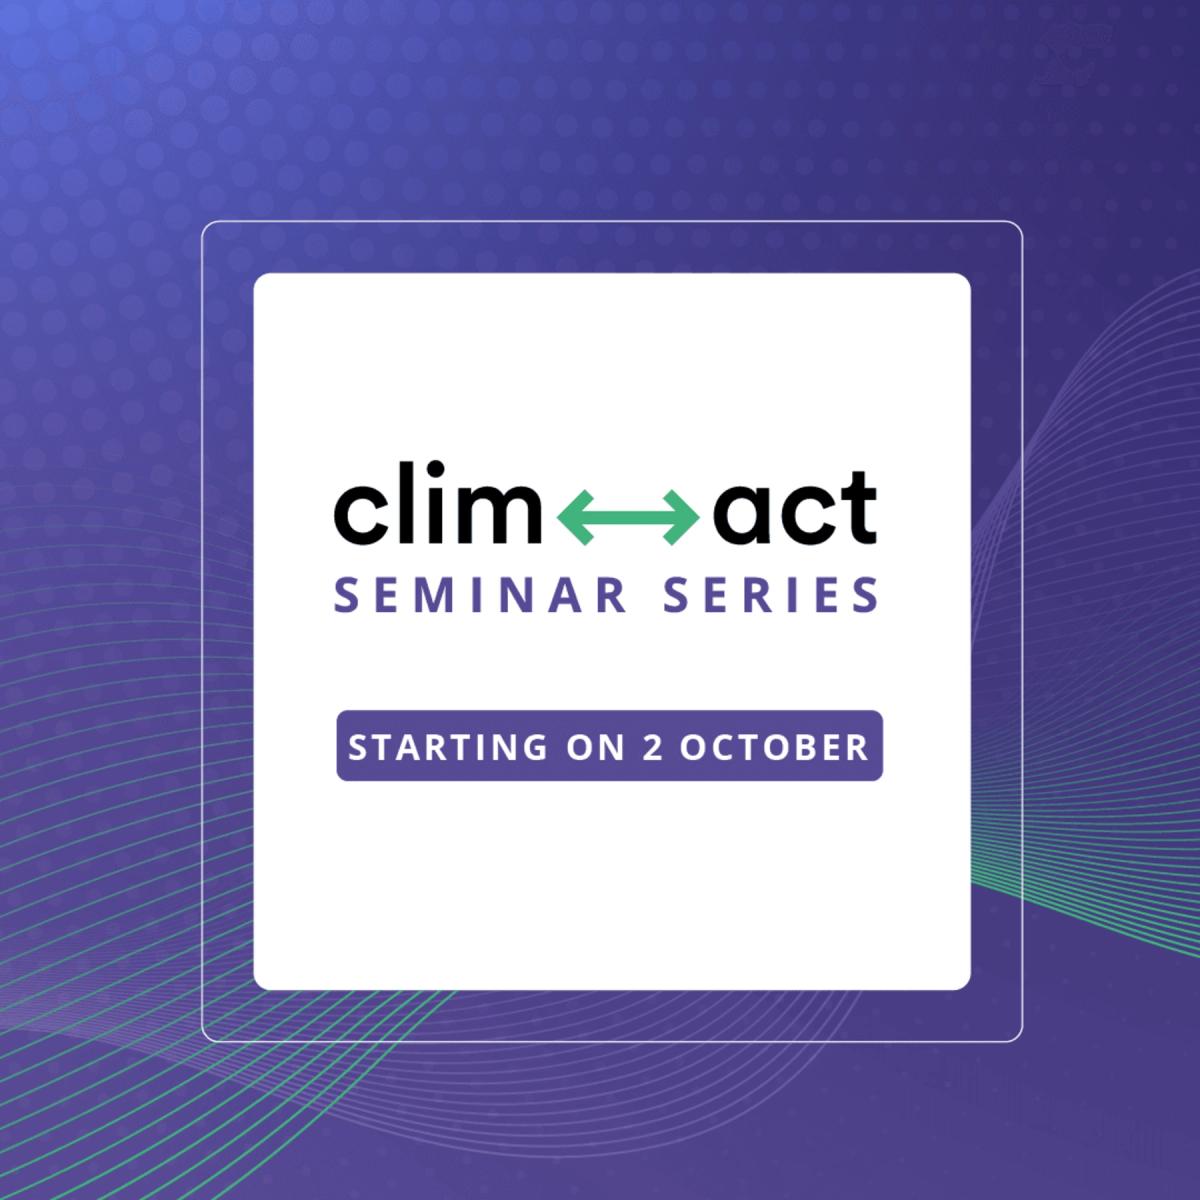 A fourth seminar series for CLIMACT